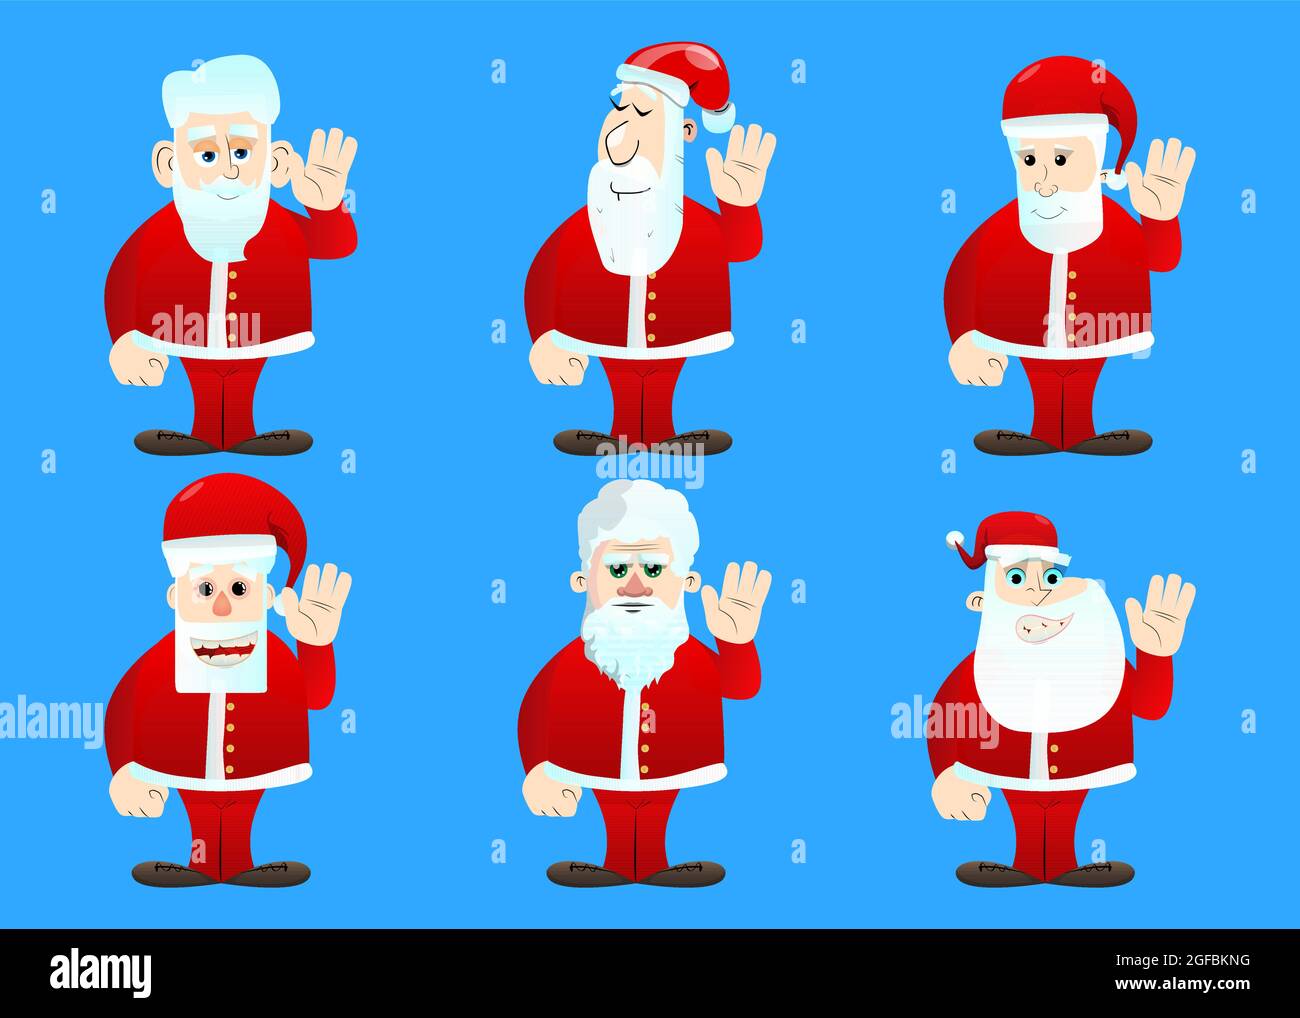 Santa Claus in his red clothes with white beard with waving hand ...